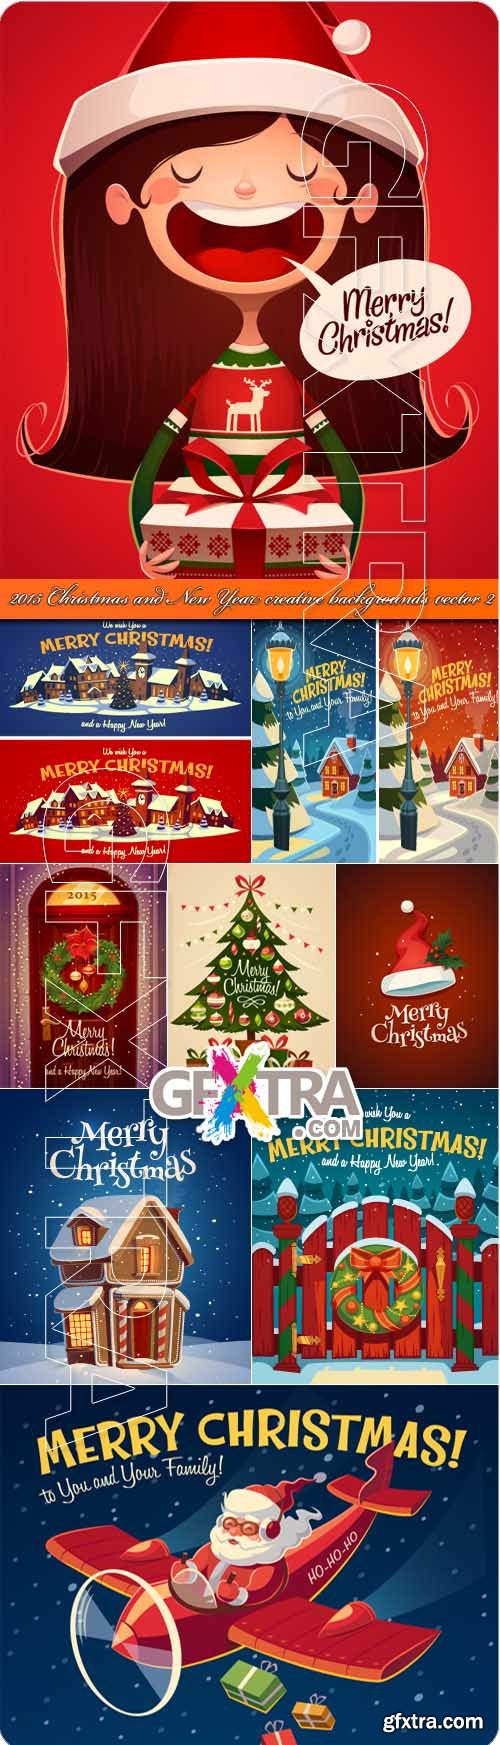 2015 Christmas and New Year creative backgrounds vector 2